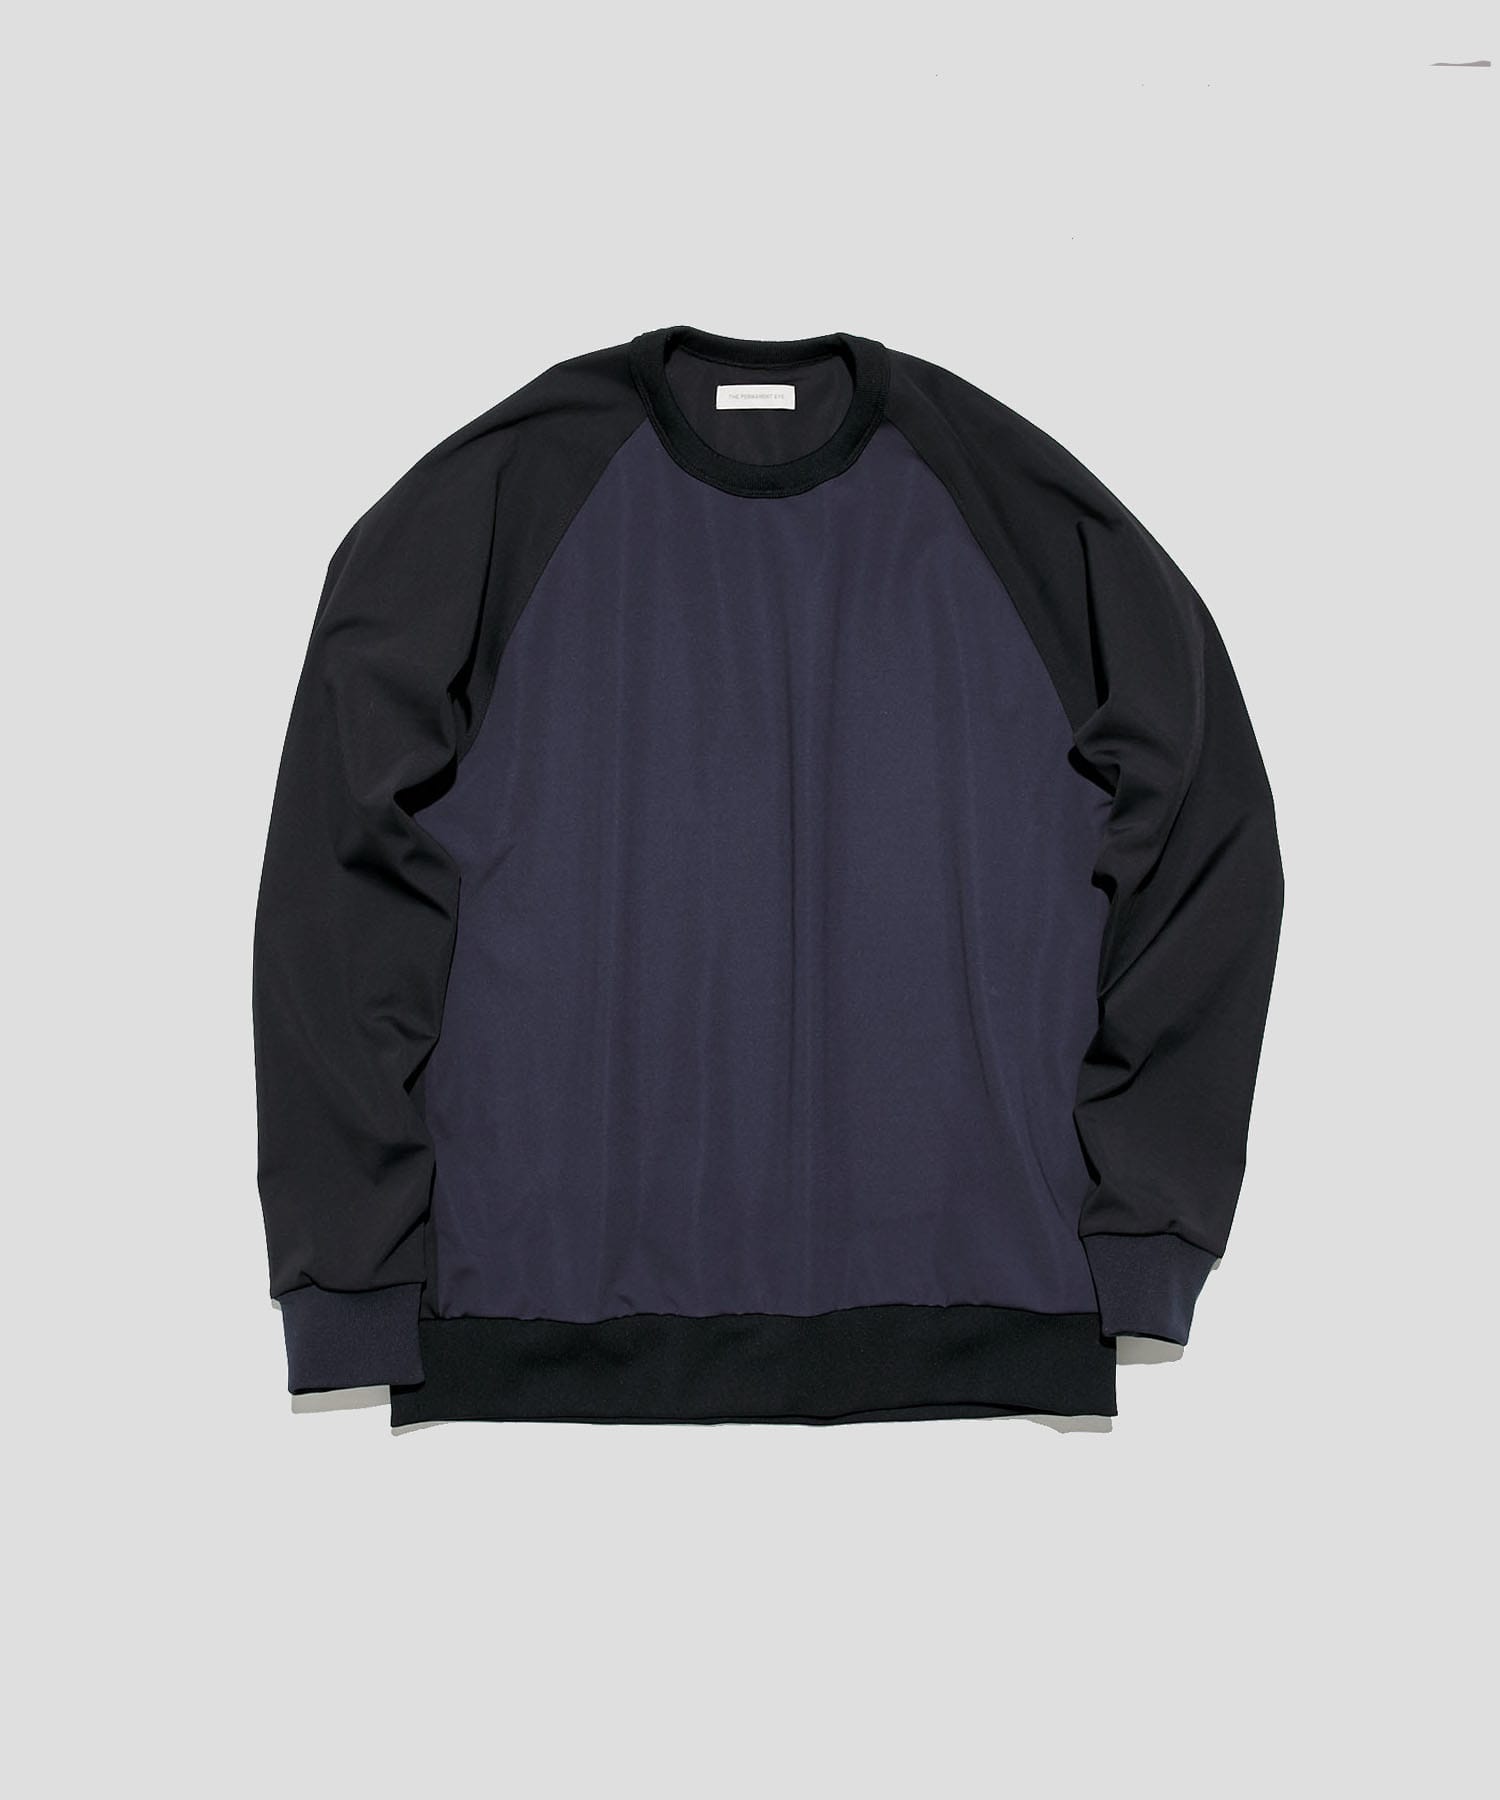 Washable High Function Jersey Raglan L/S Tops